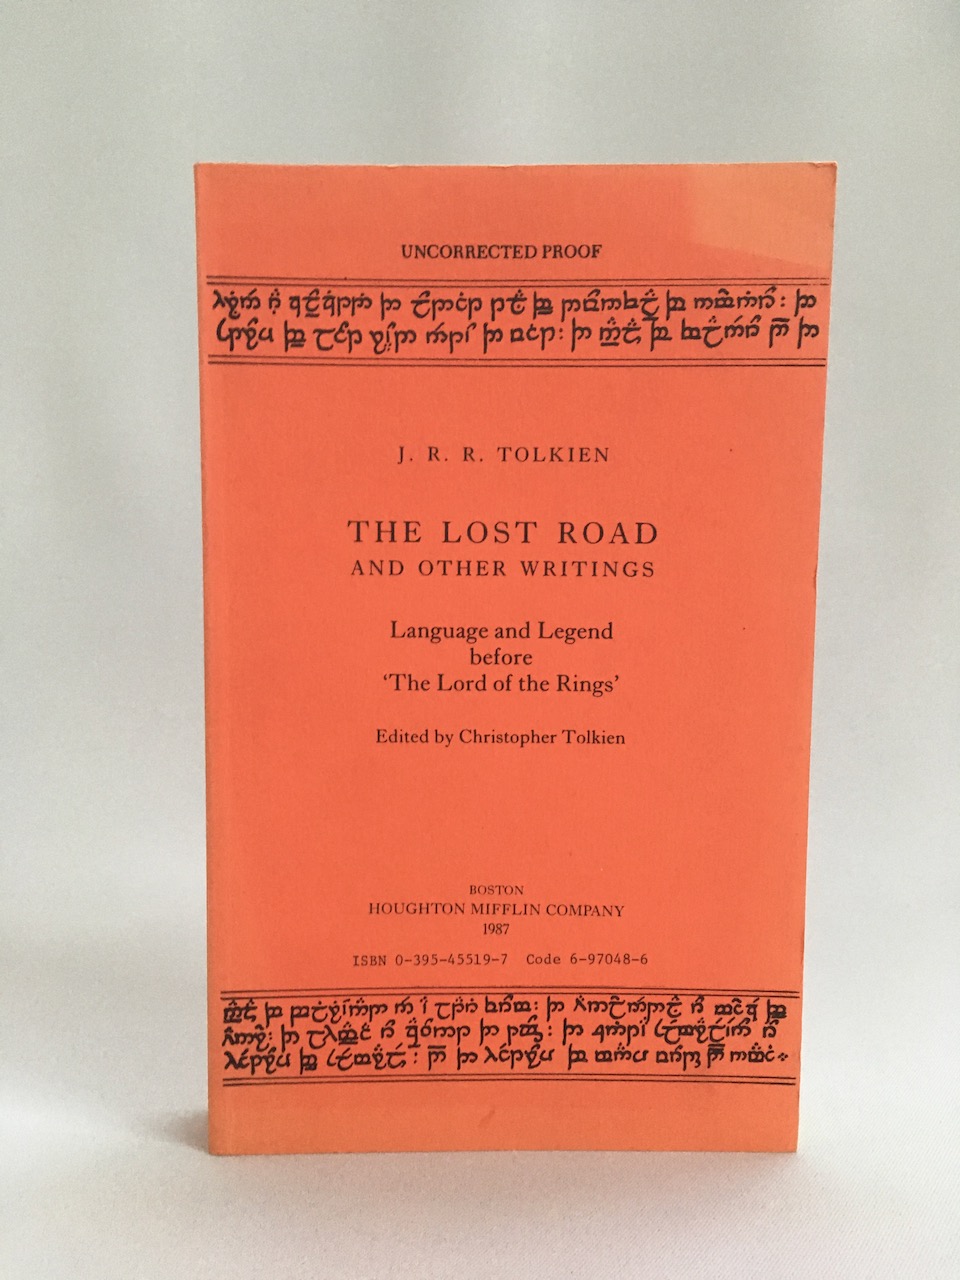 Advance Uncorrected Proof of The Lost Road and Other Writings edited by Christoper Tolkien